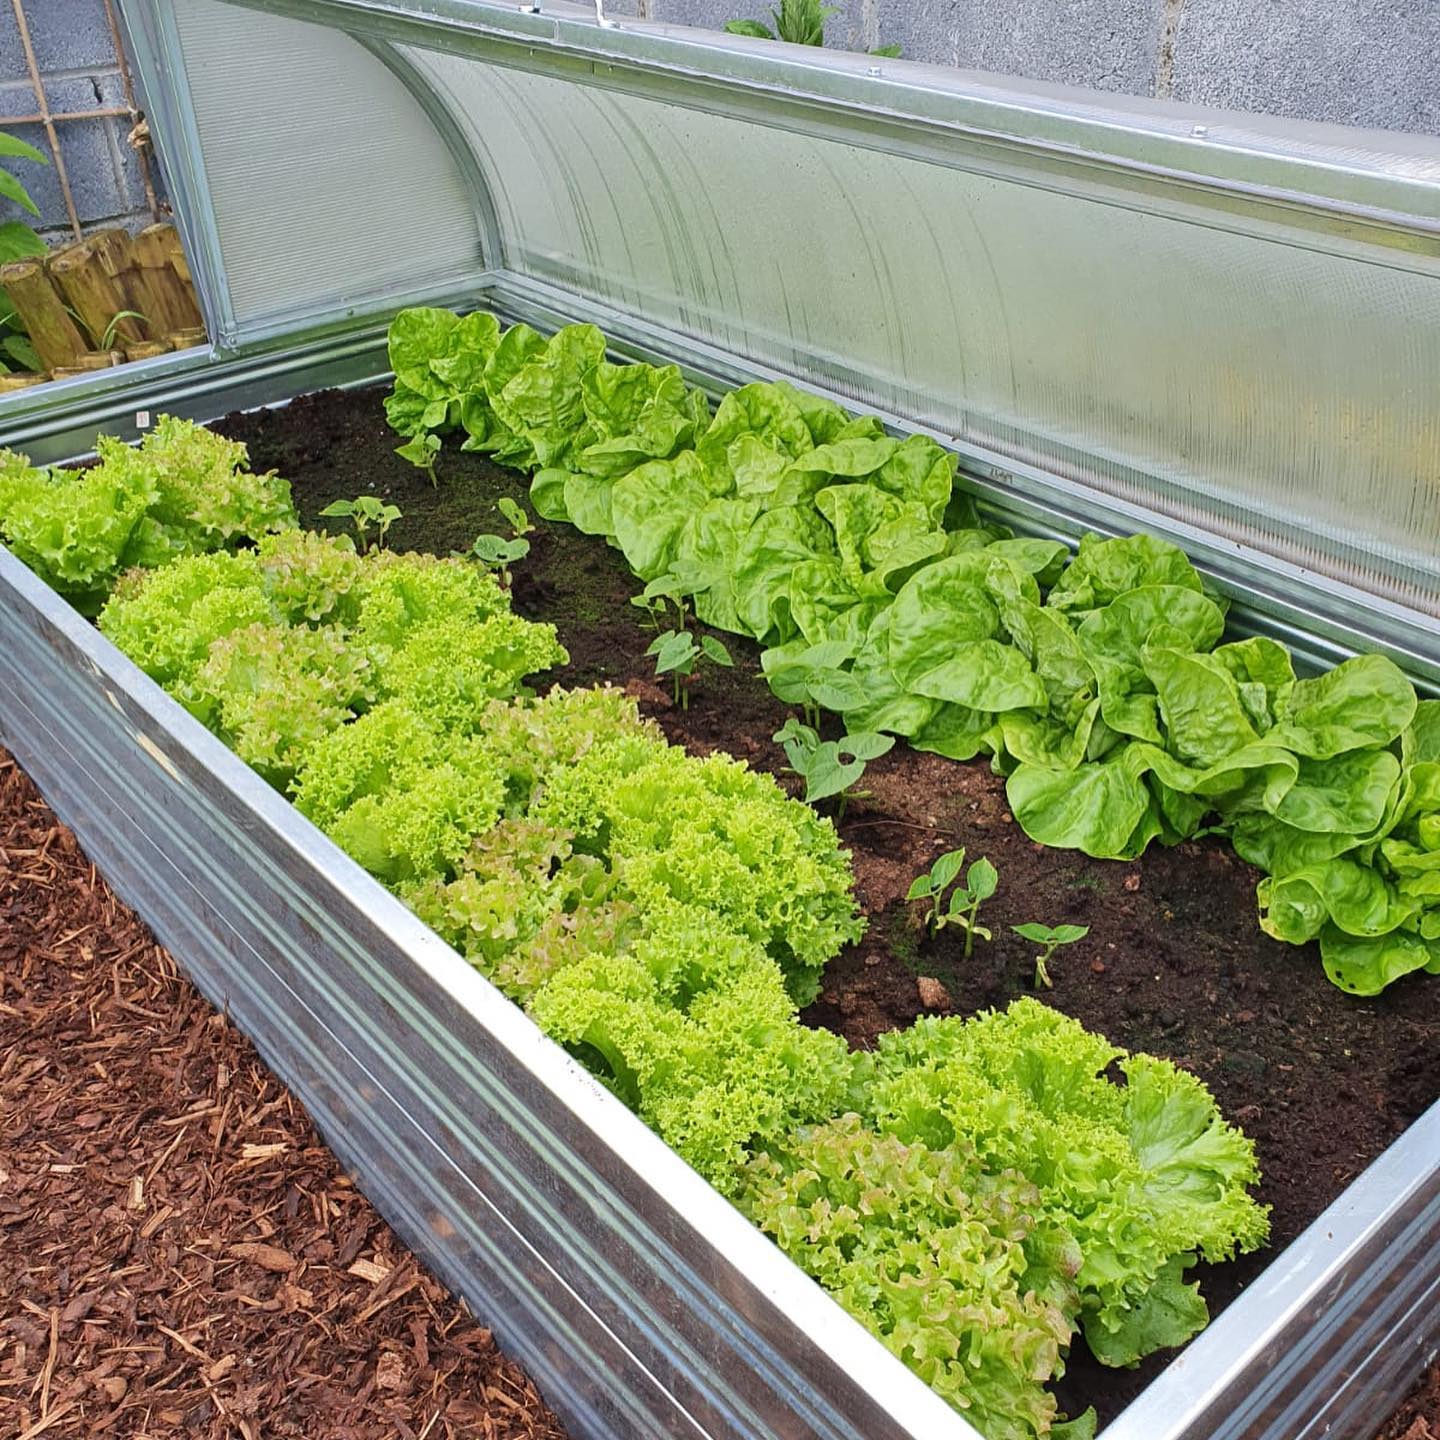 POLYCARBONATE SEEDBEDS